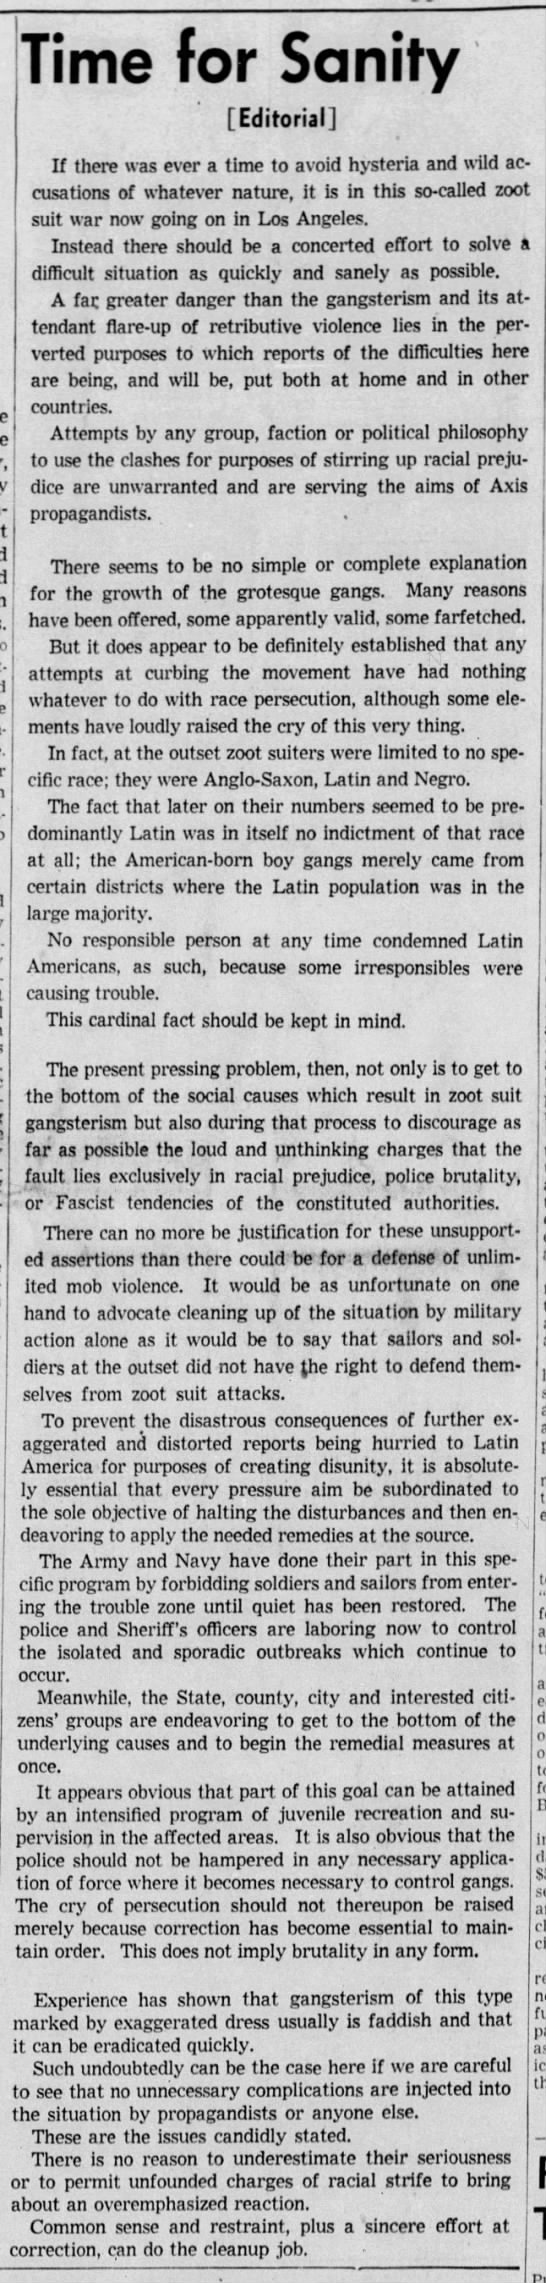 Los Angeles Times editorial blames Zoot Suit Riots on "gangsterism" not "race persecution" - 